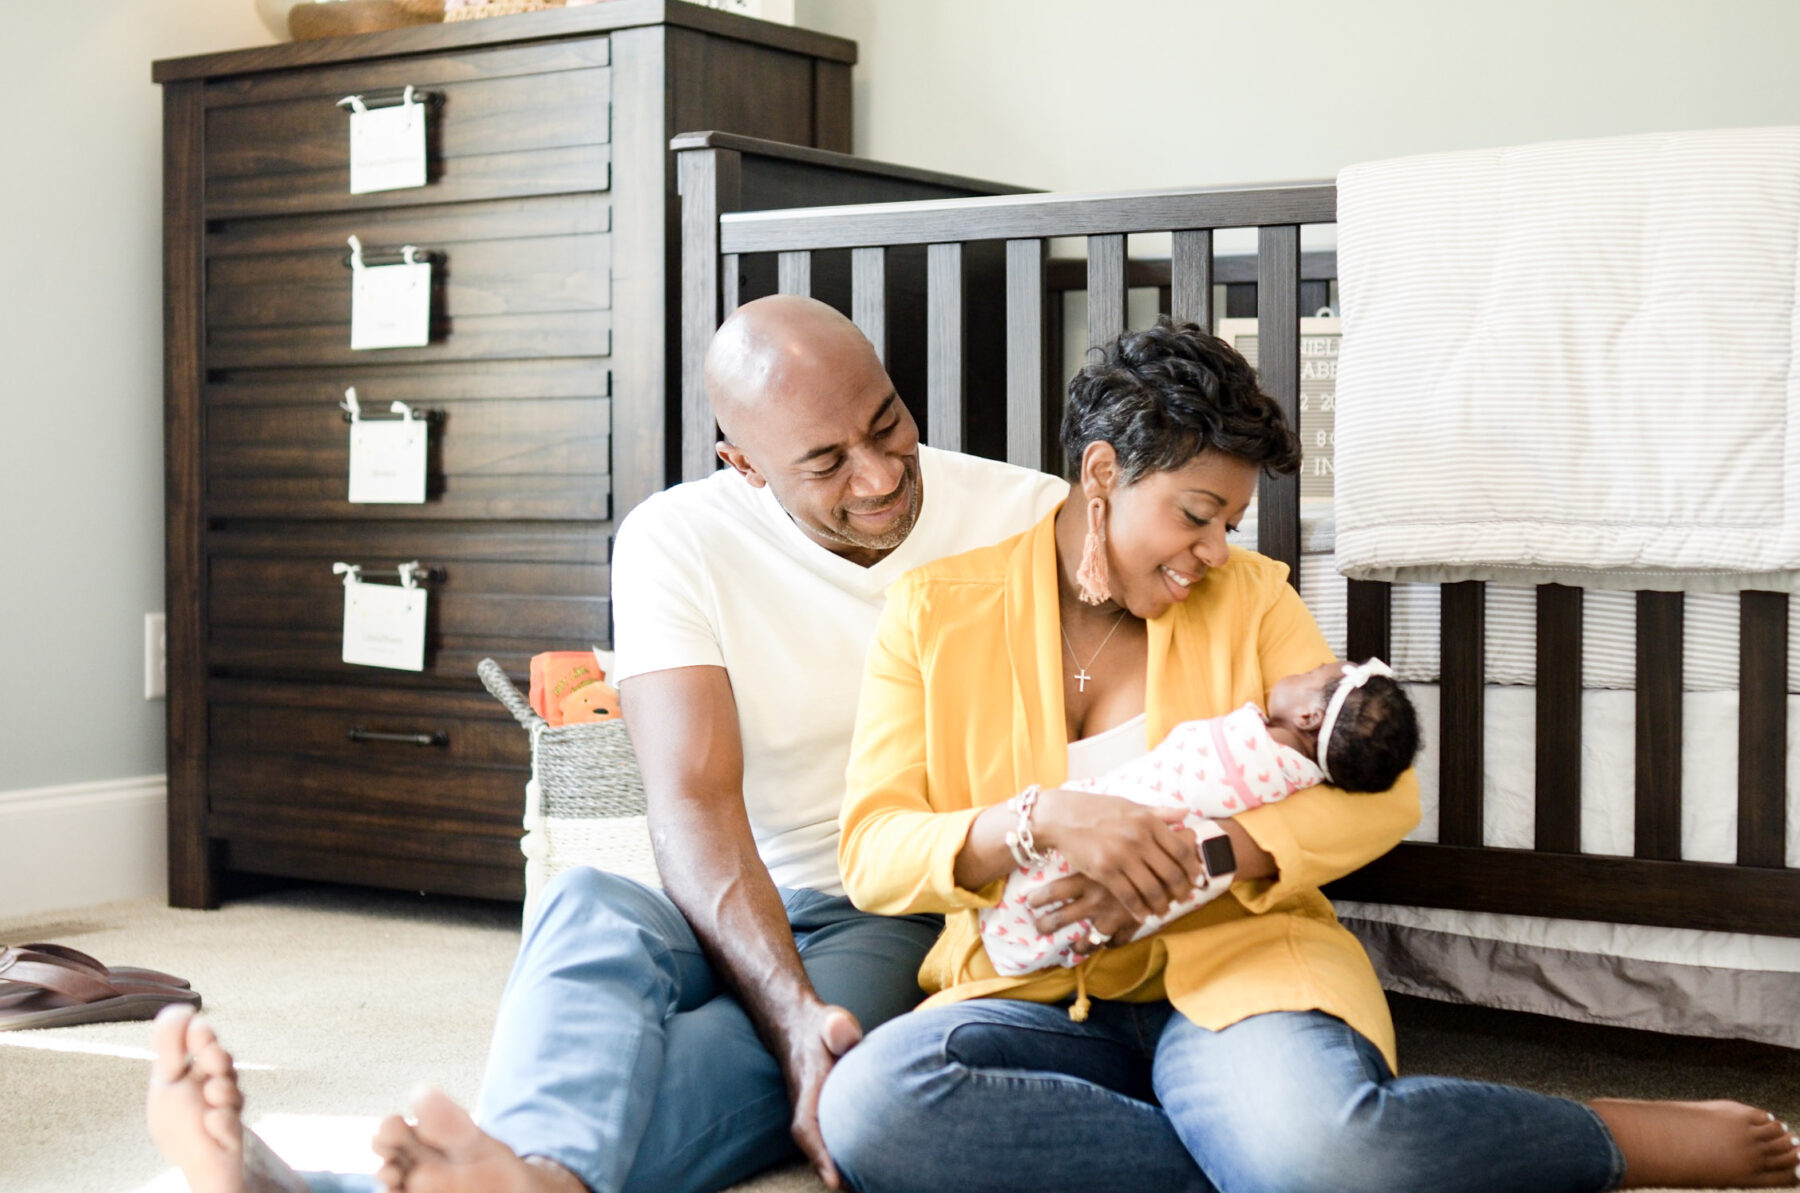 Sweet Newborn Session from By Jarquise featured on Nashville Bride Guide